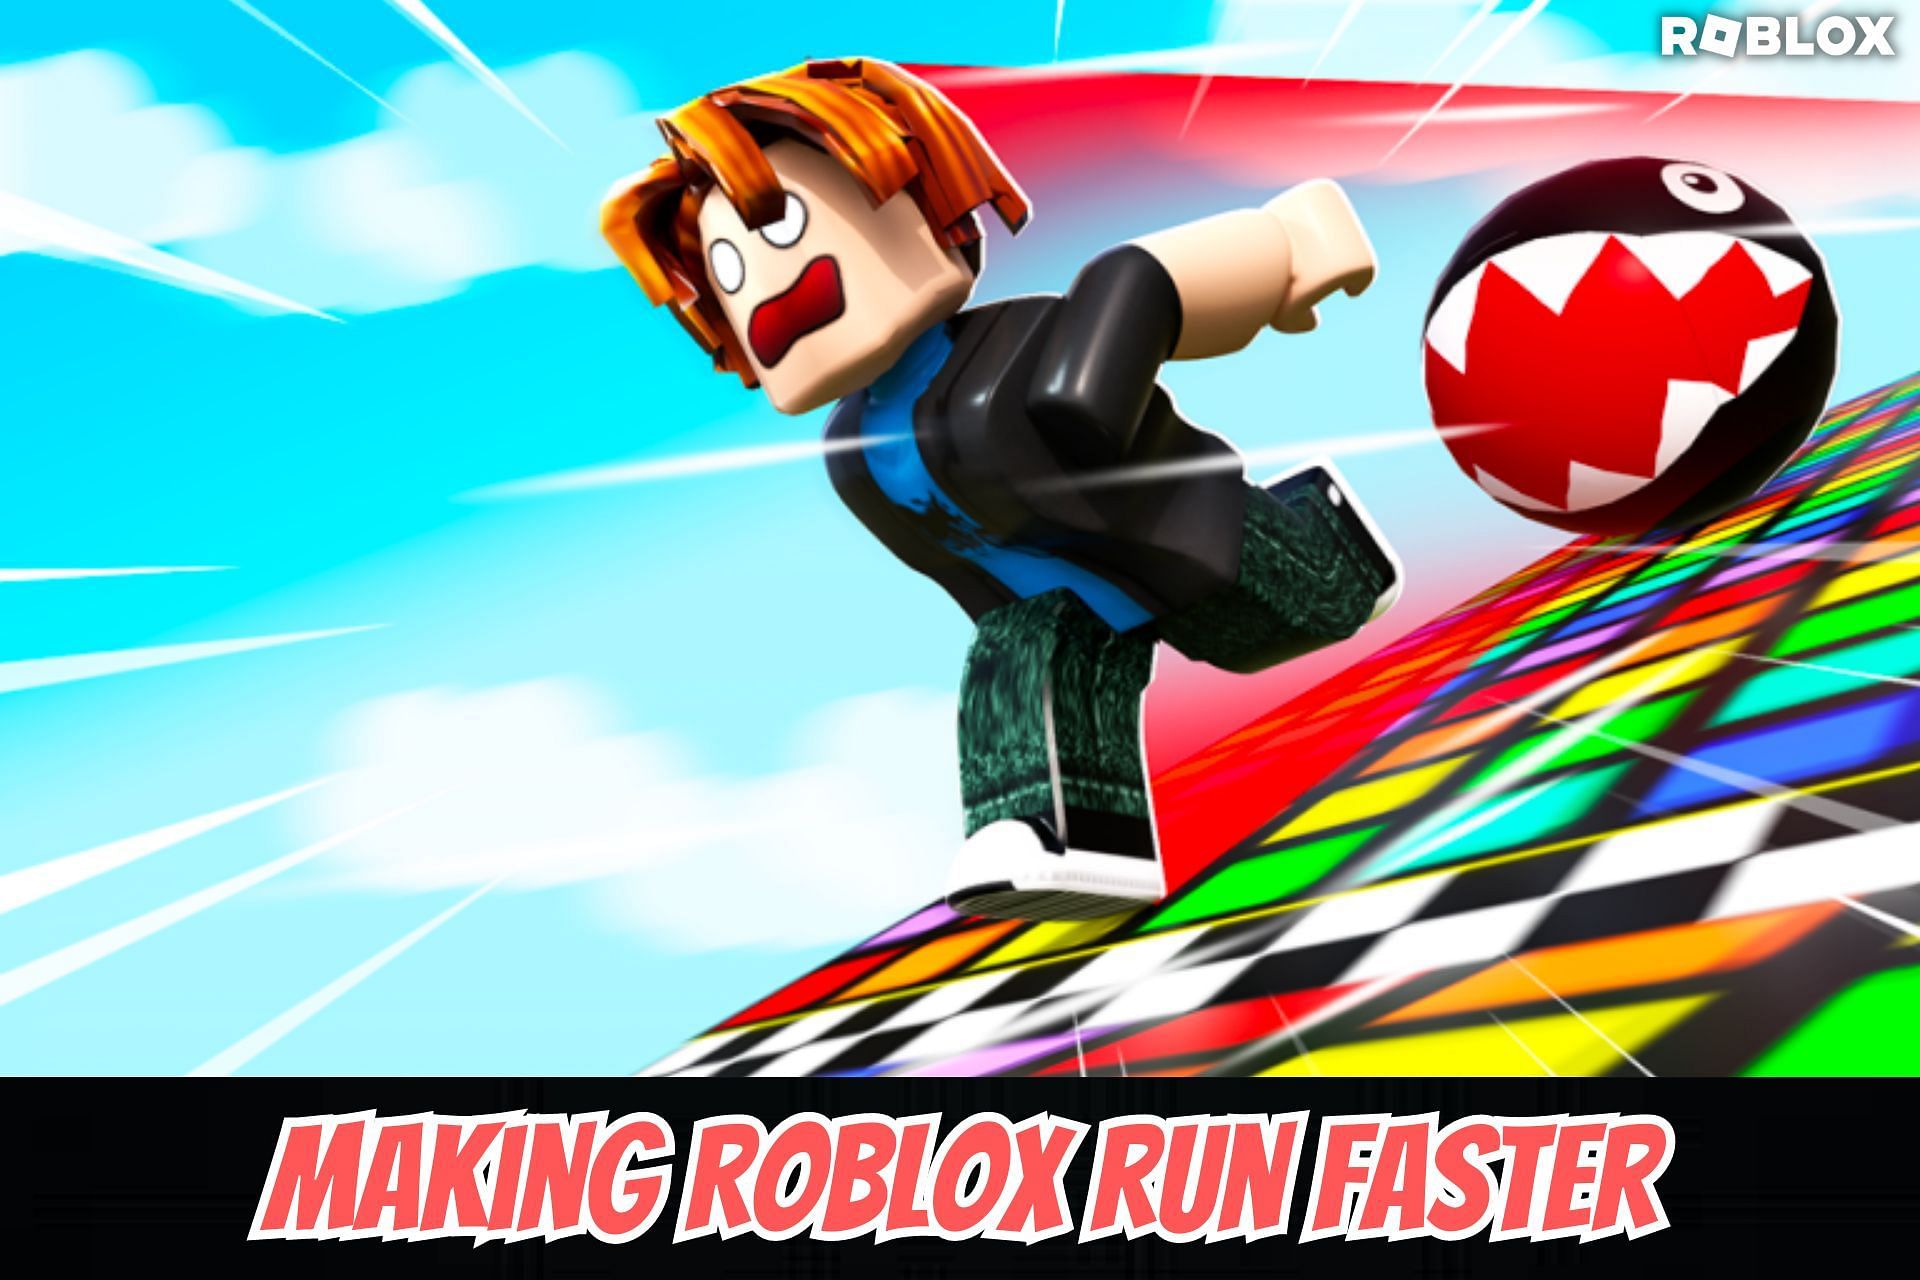 Play your favorite games without any lags (Image via Roblox)